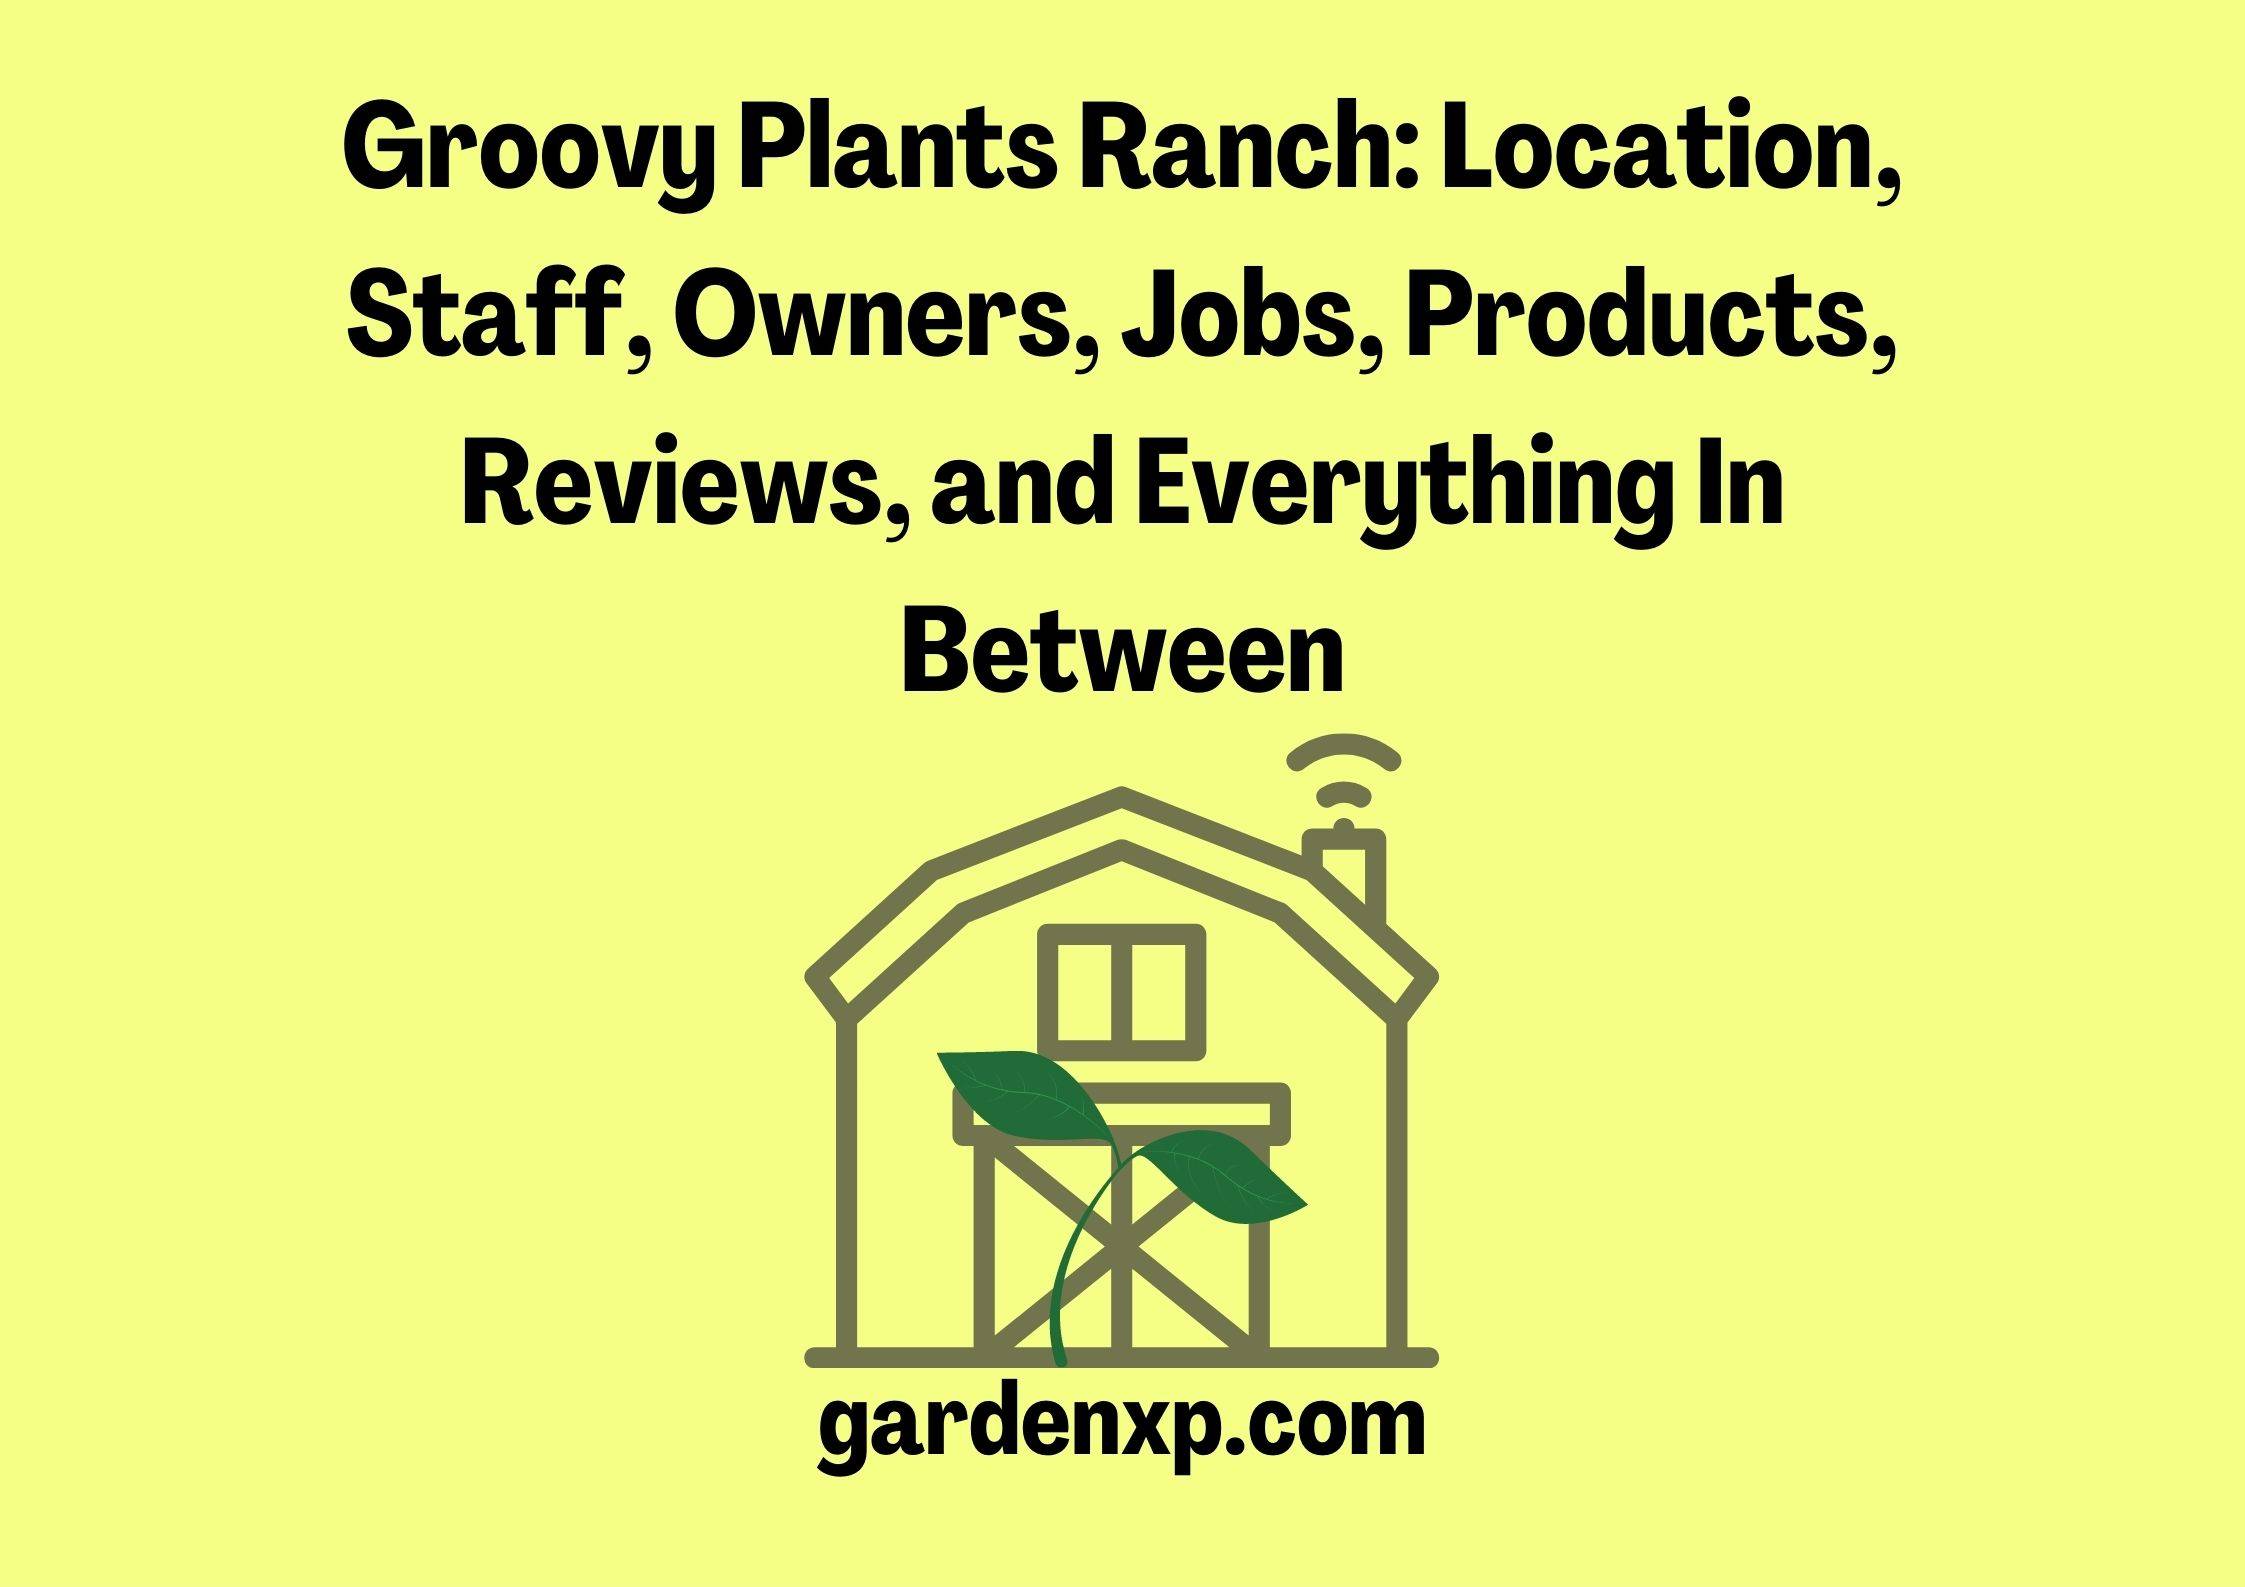 Groovy Plants Ranch: Location, Staff, Owners, Jobs, Products, Reviews, and Everything In Between